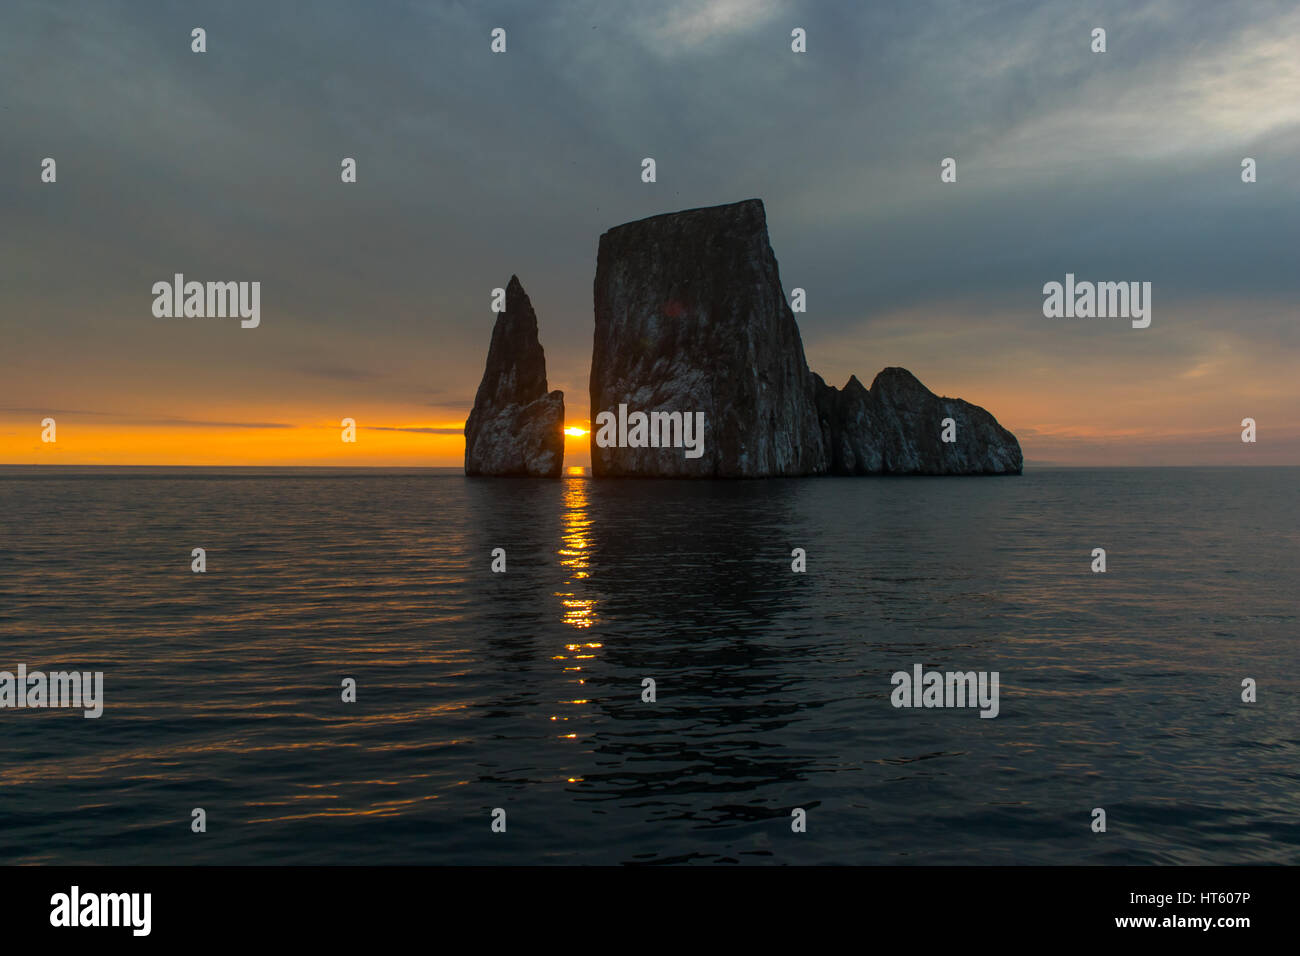 Kicker rock (also known as Leon Dormido) at sunset. Galapagos Islands. Stock Photo